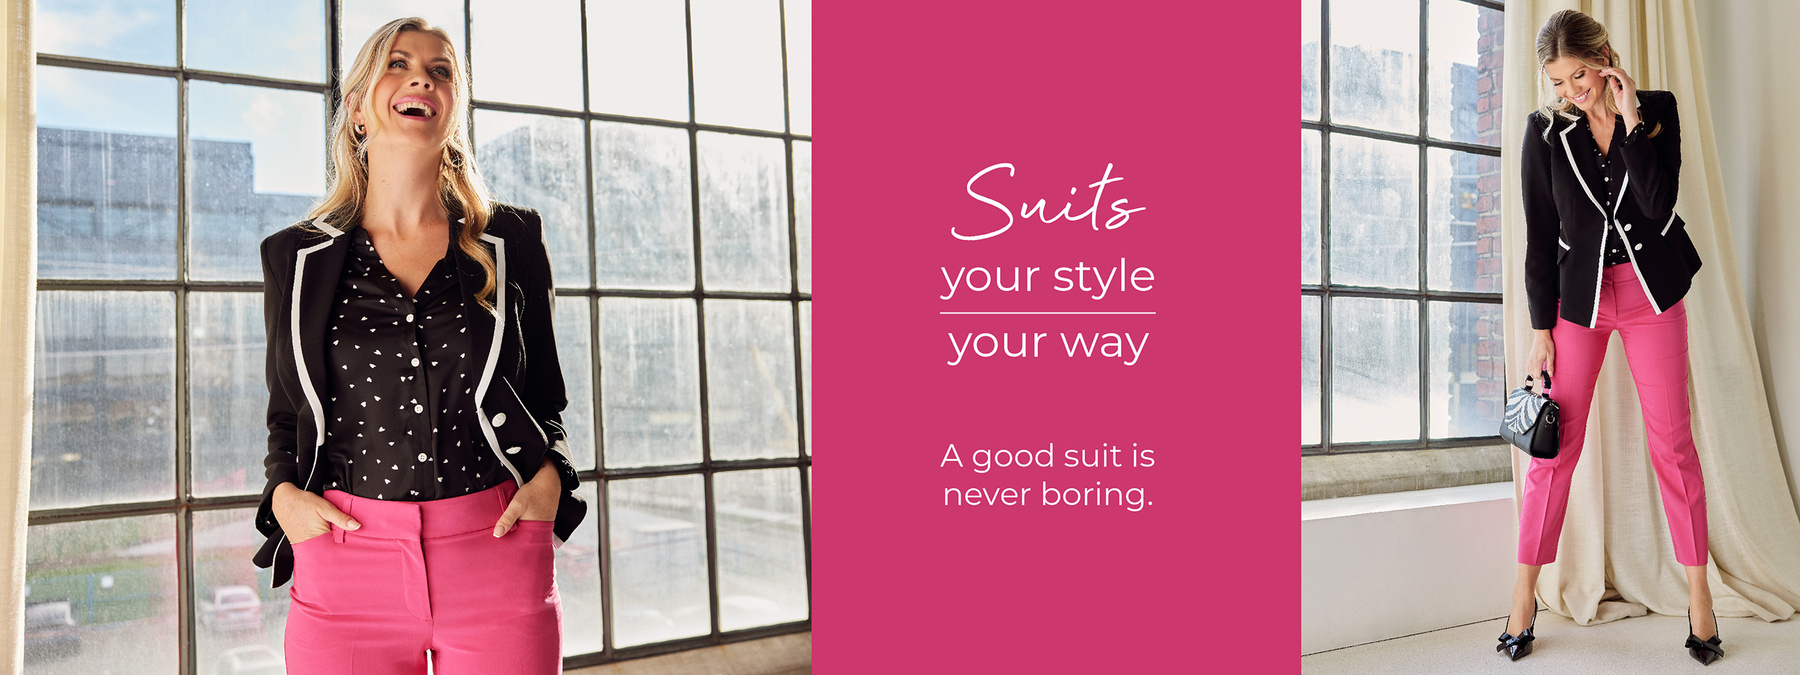 Suits your style your way. A good suit is never boring.